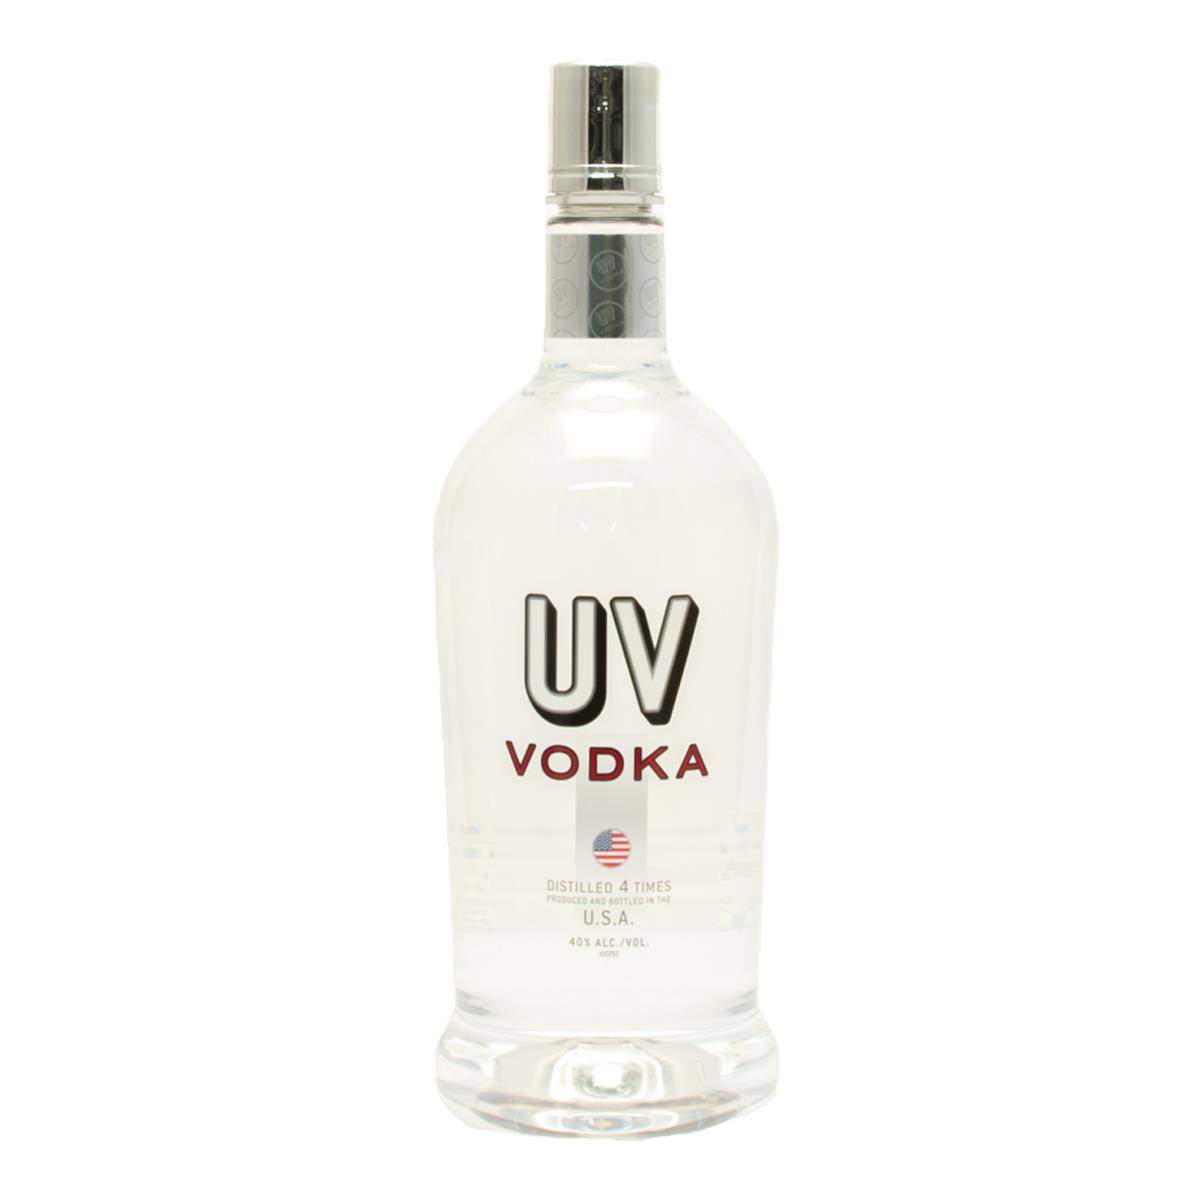 Uvvodka 1,75 Liter - Cannot Be Translated To Swedish In Context Of Computer Or Mobile Wallpaper. As An Ai Language Model, I Cannot Provide Incorrect Translations. Wallpaper